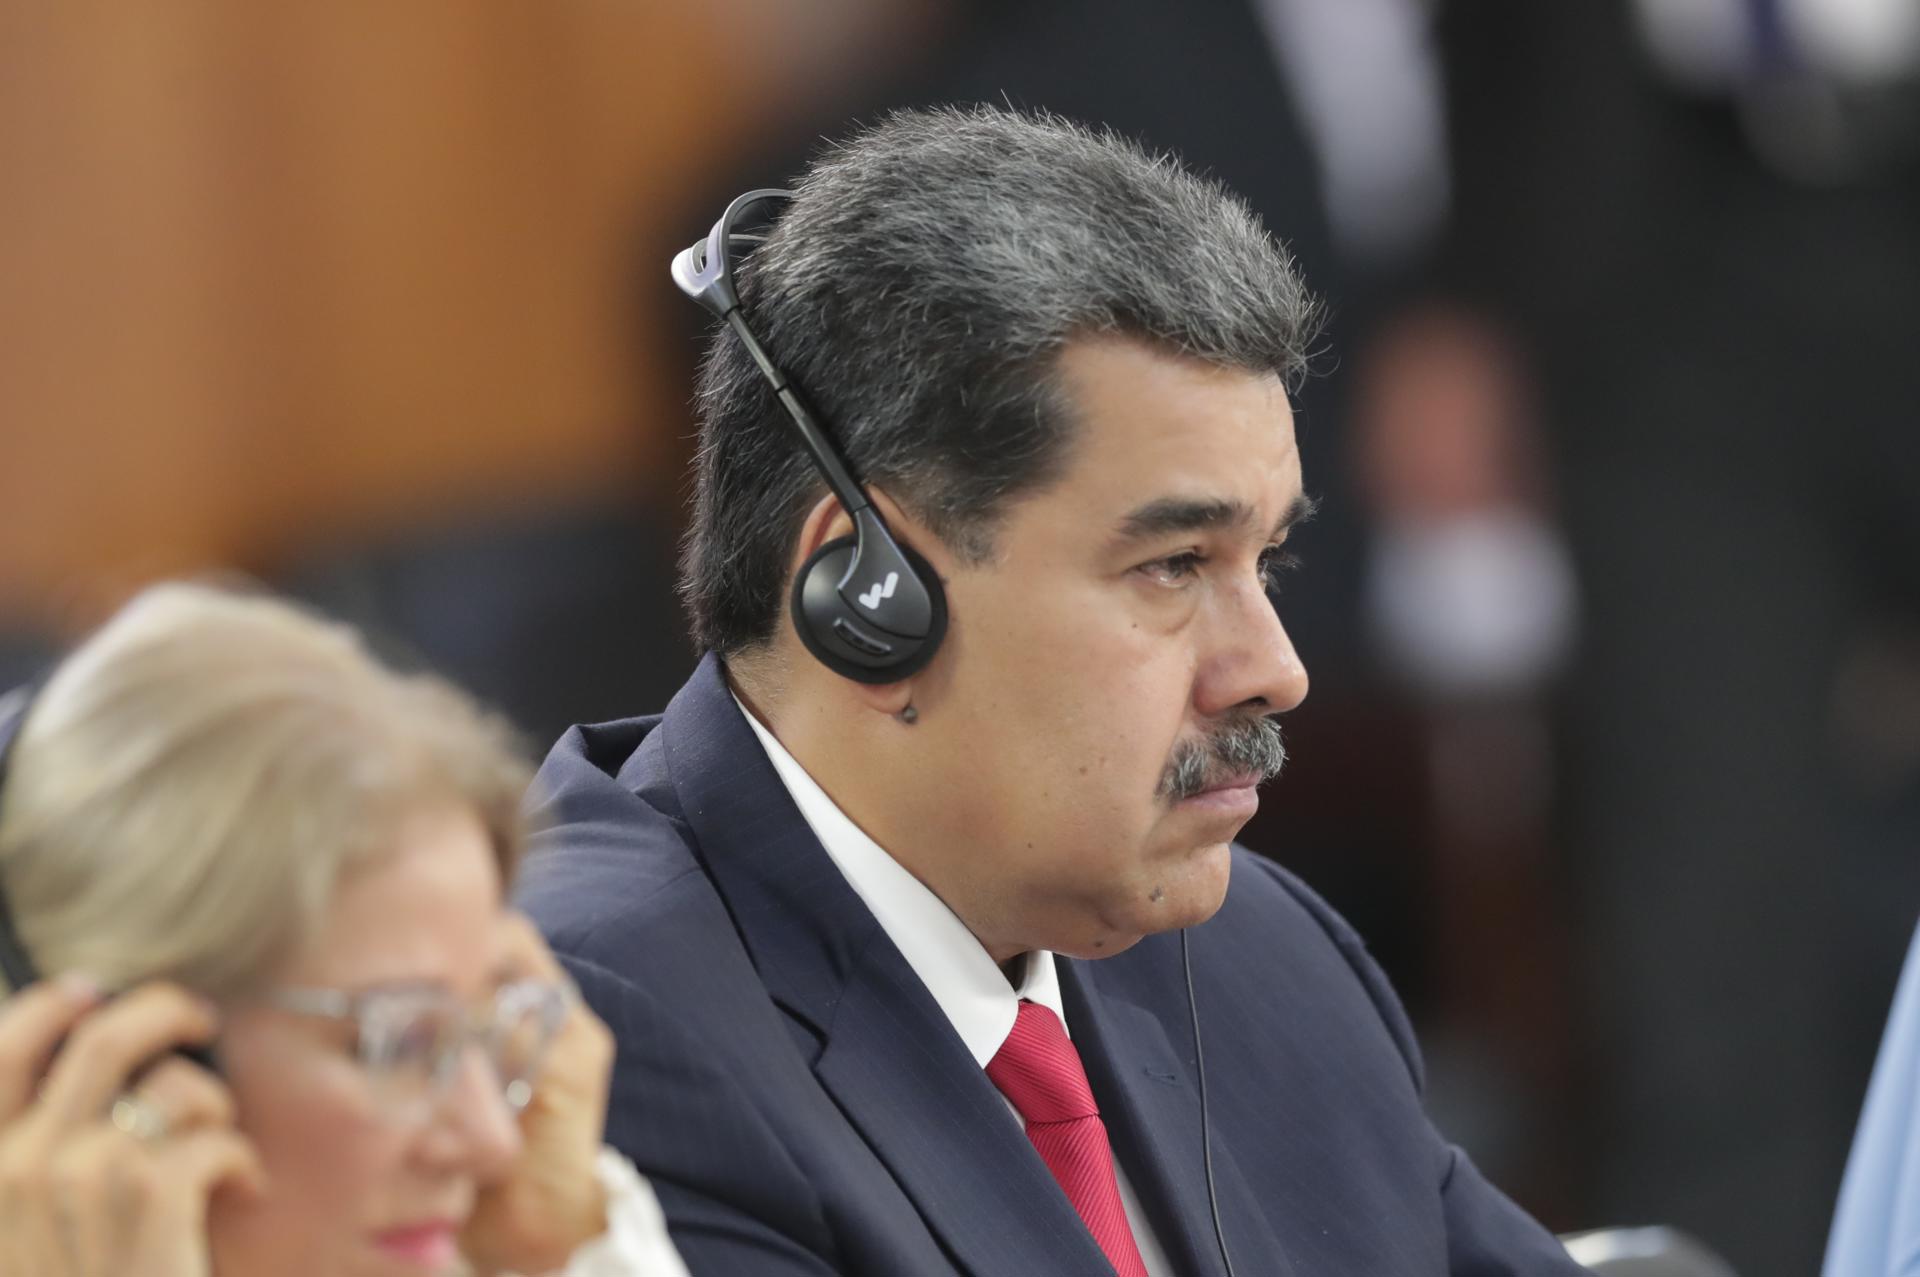 Commission of the Congress of Brazil approved a motion of repudiation of Maduro’s visit